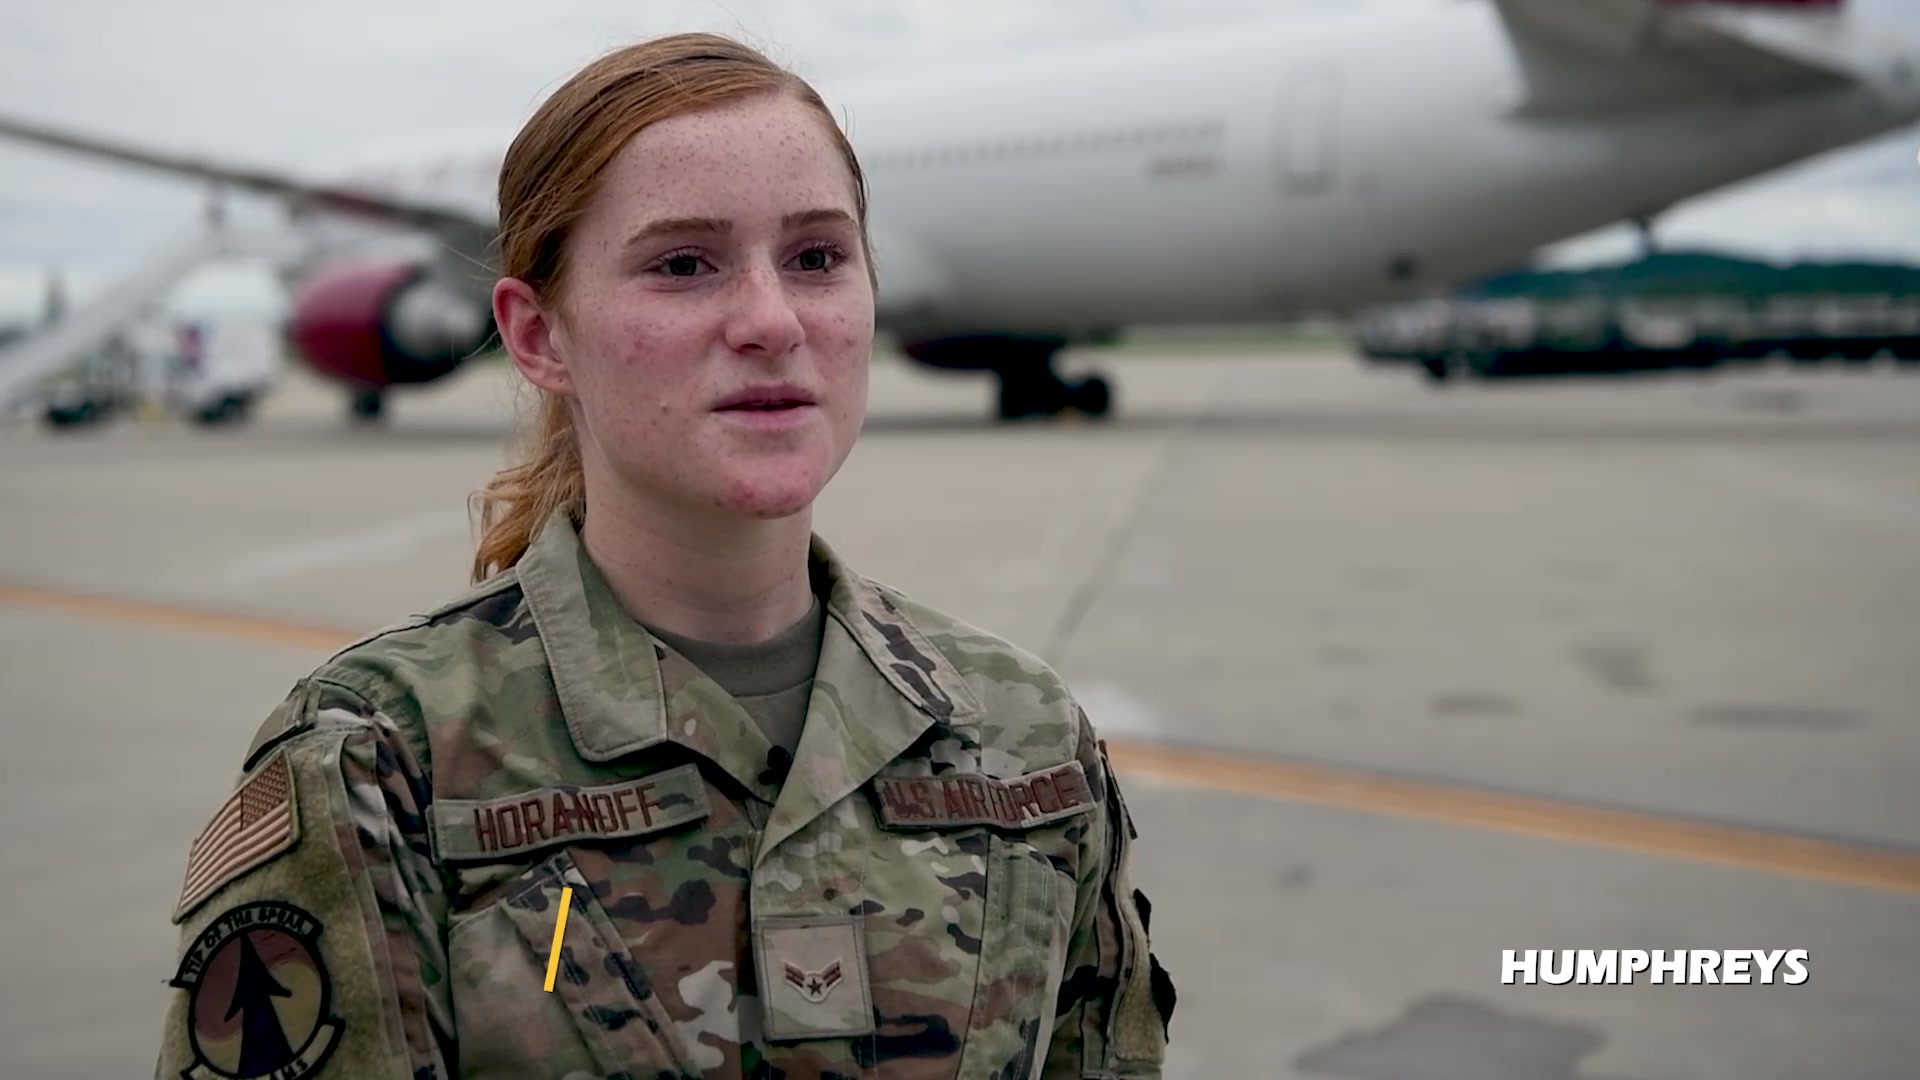 The 731st Air Mobility Squadron is the primary aerial port for the Korean Peninsula. SSgt Elijah Atkins and A1C Natalie Horanoff tell the mission of the squadron. (U.S. Air Force video by A1C Ariana Howard)